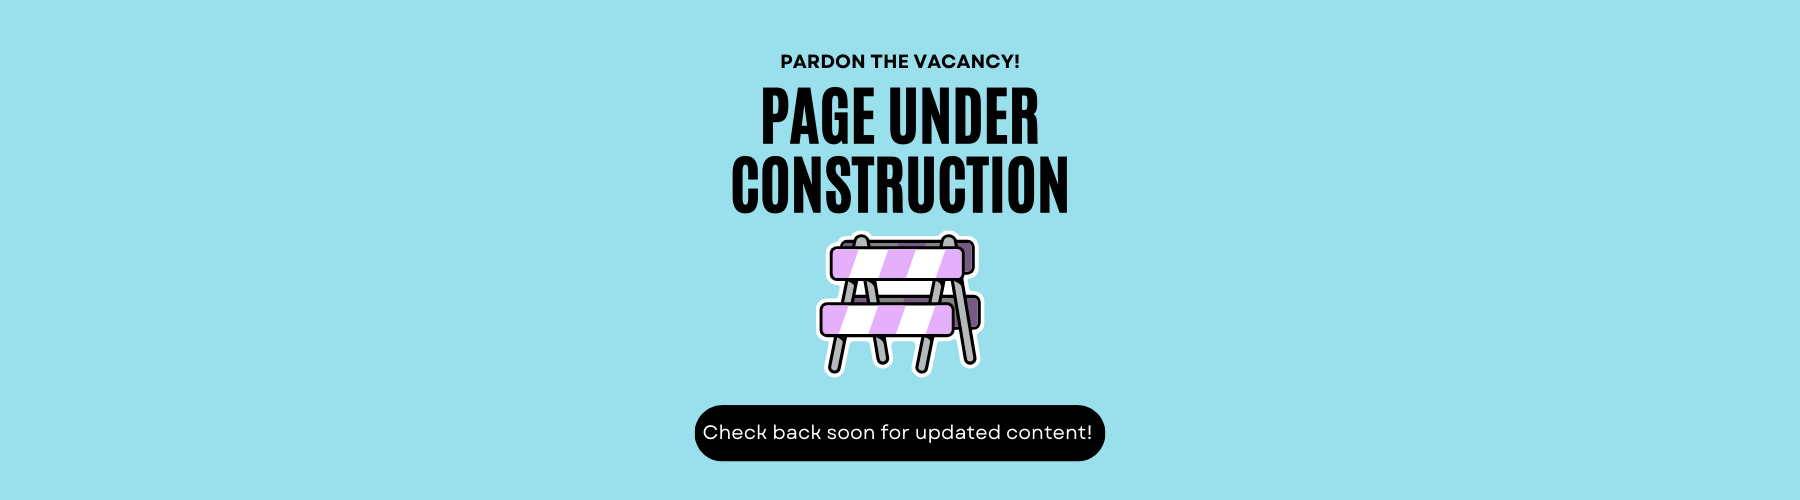 page under construction image